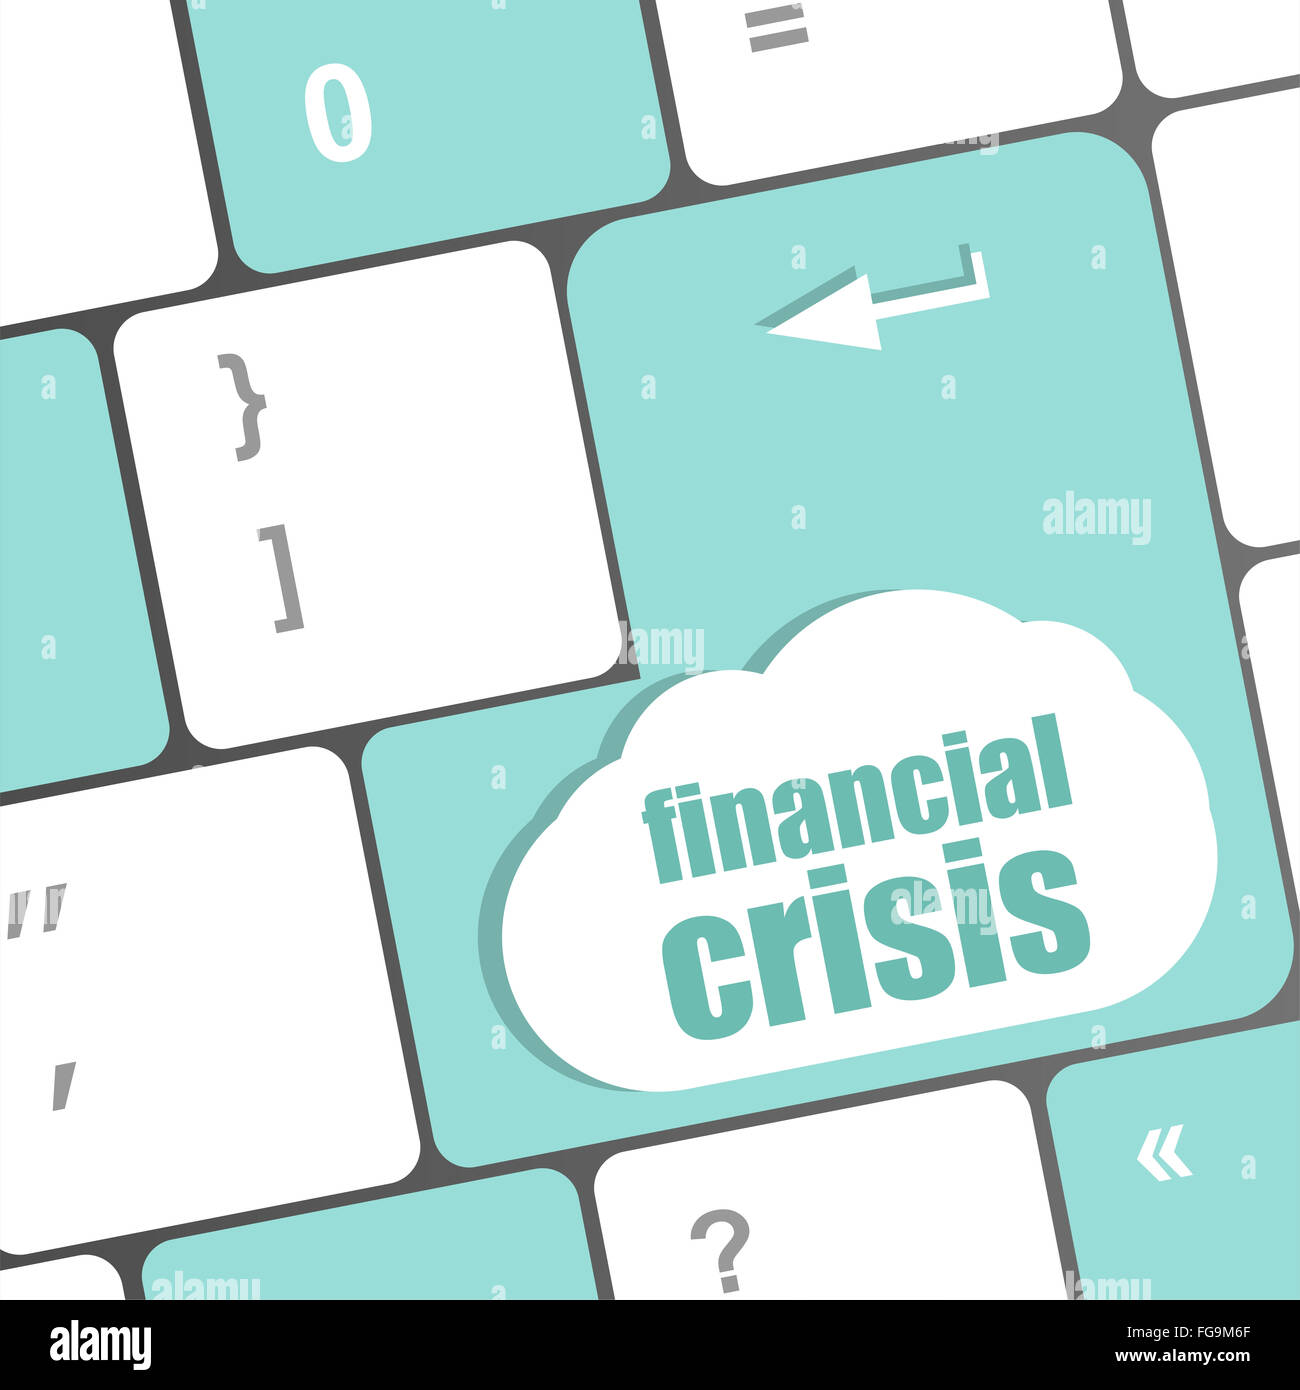 financial crisis key showing business insurance concept Stock Photo